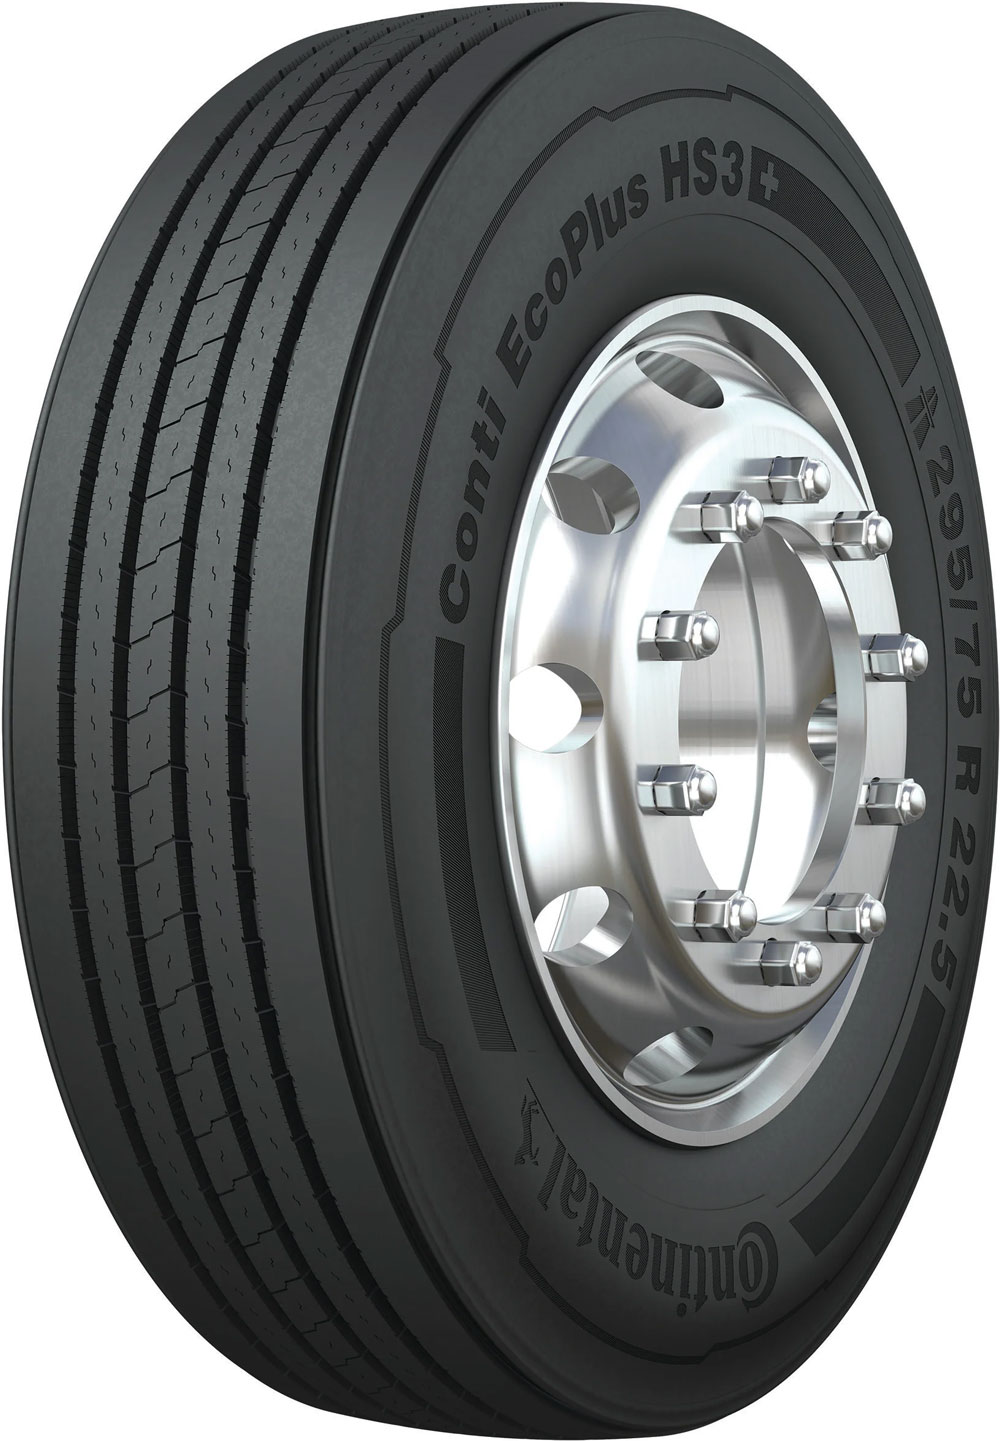 product_type-heavy_tires CONTINENTAL EcoPlus HS3+ 20 TL 385/55 R22.5 160K